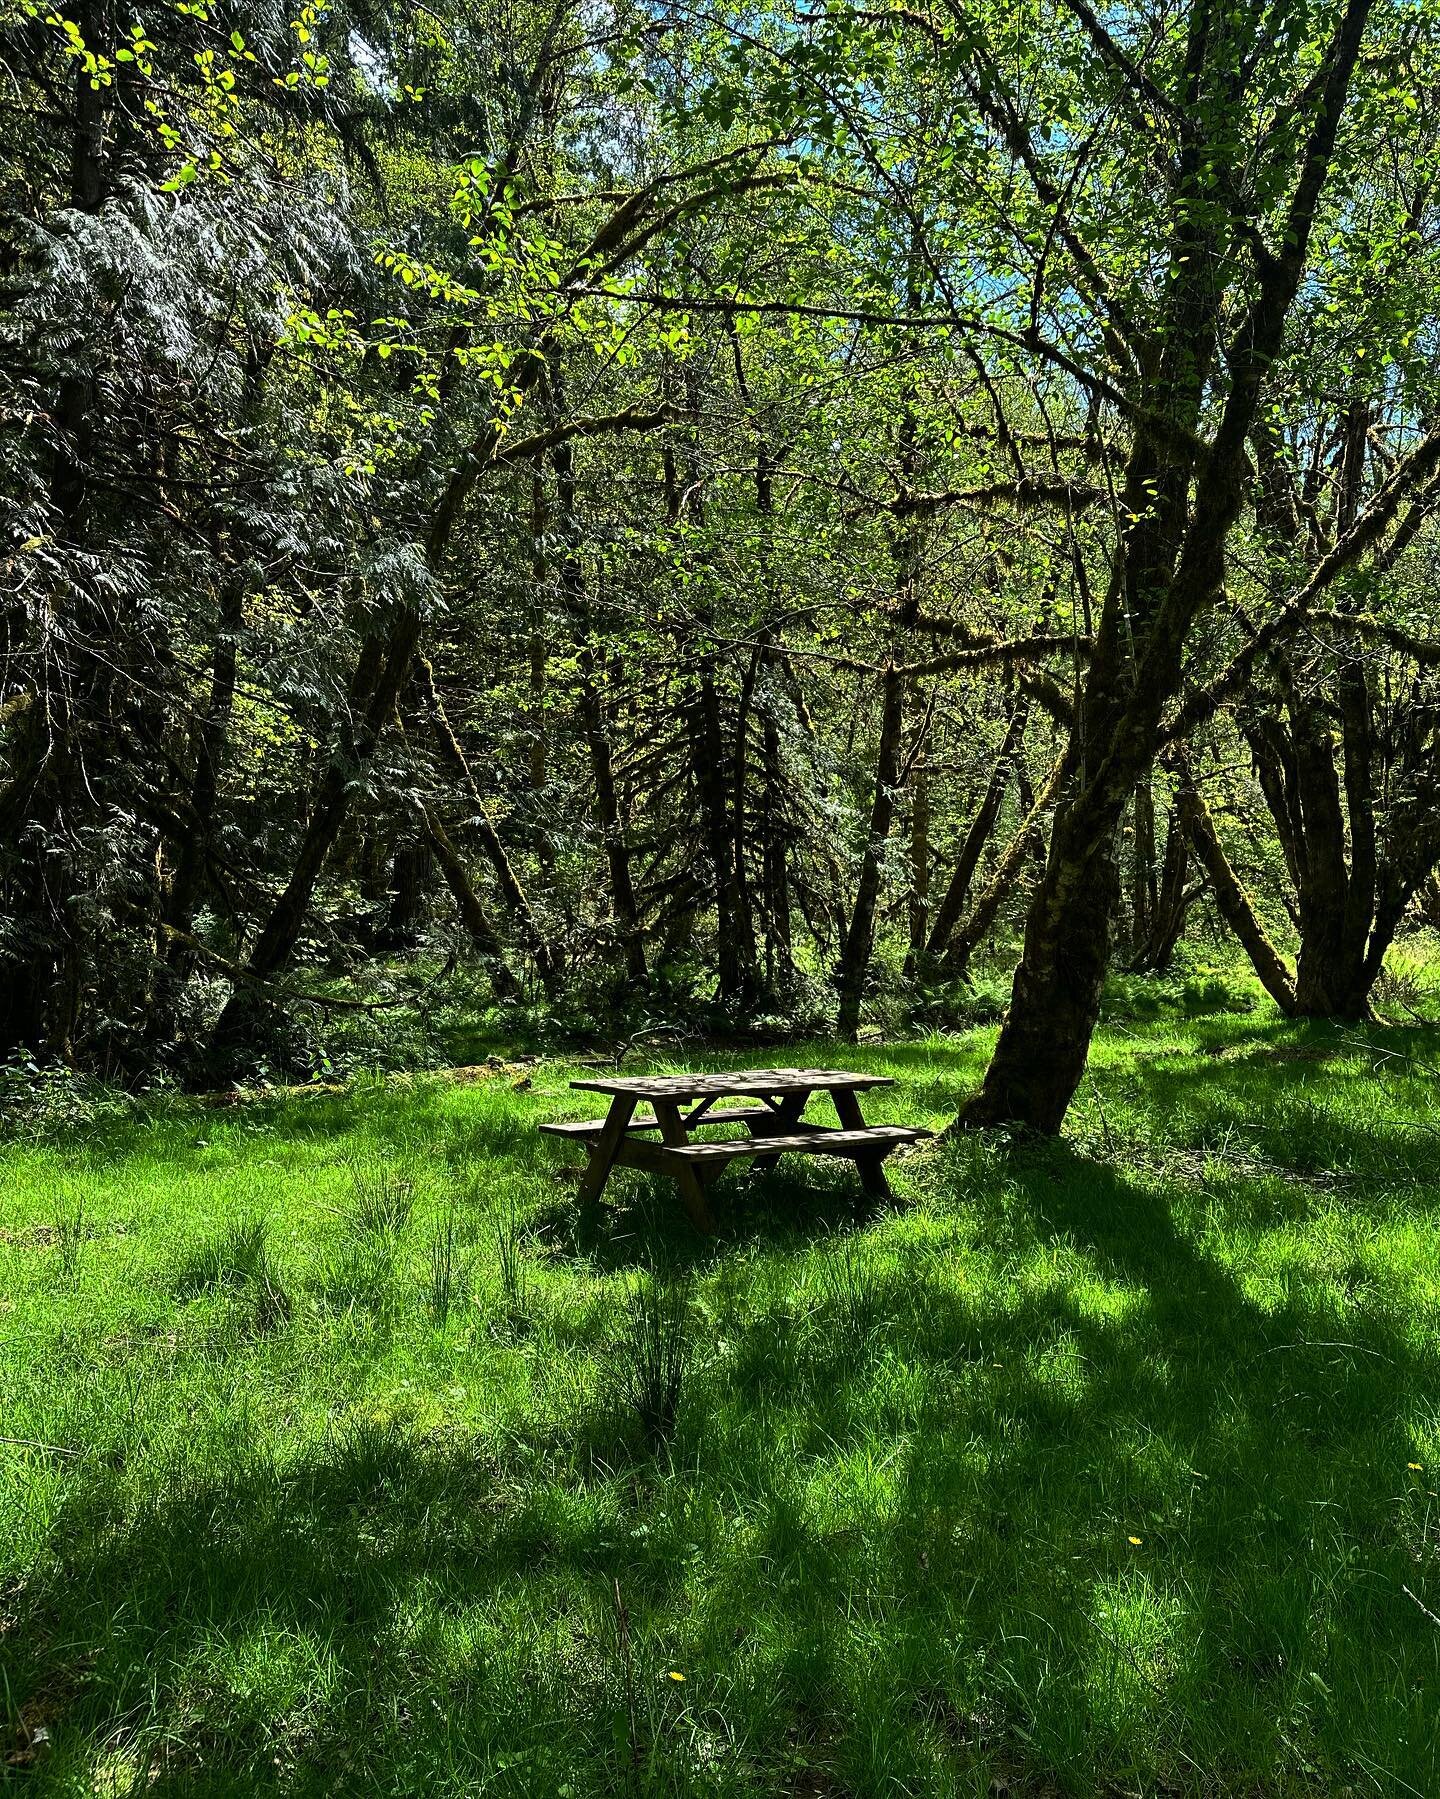 The picnic spot by the forest is back, thanks to Greg🌞

#oregonfarm #sheepfarm